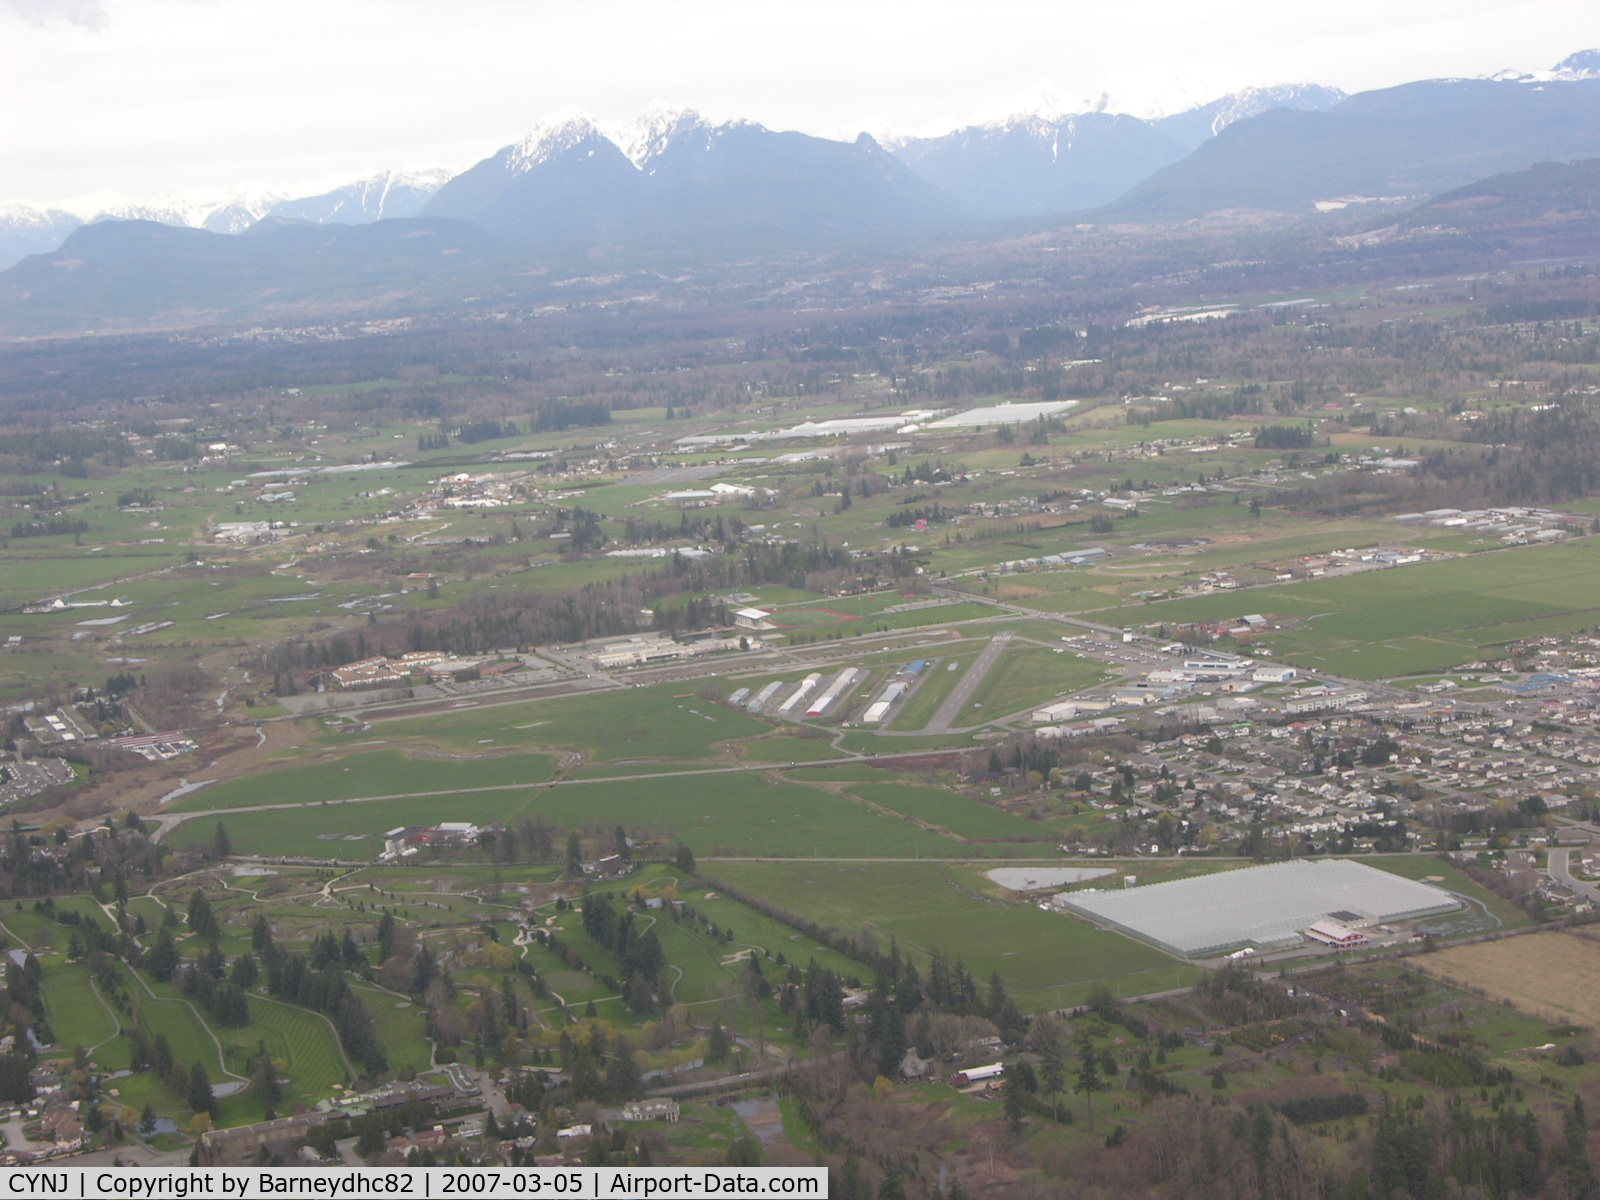 Langley Regional Airport, Langley, BC Canada (CYNJ) - Langley, BC...Home of the 